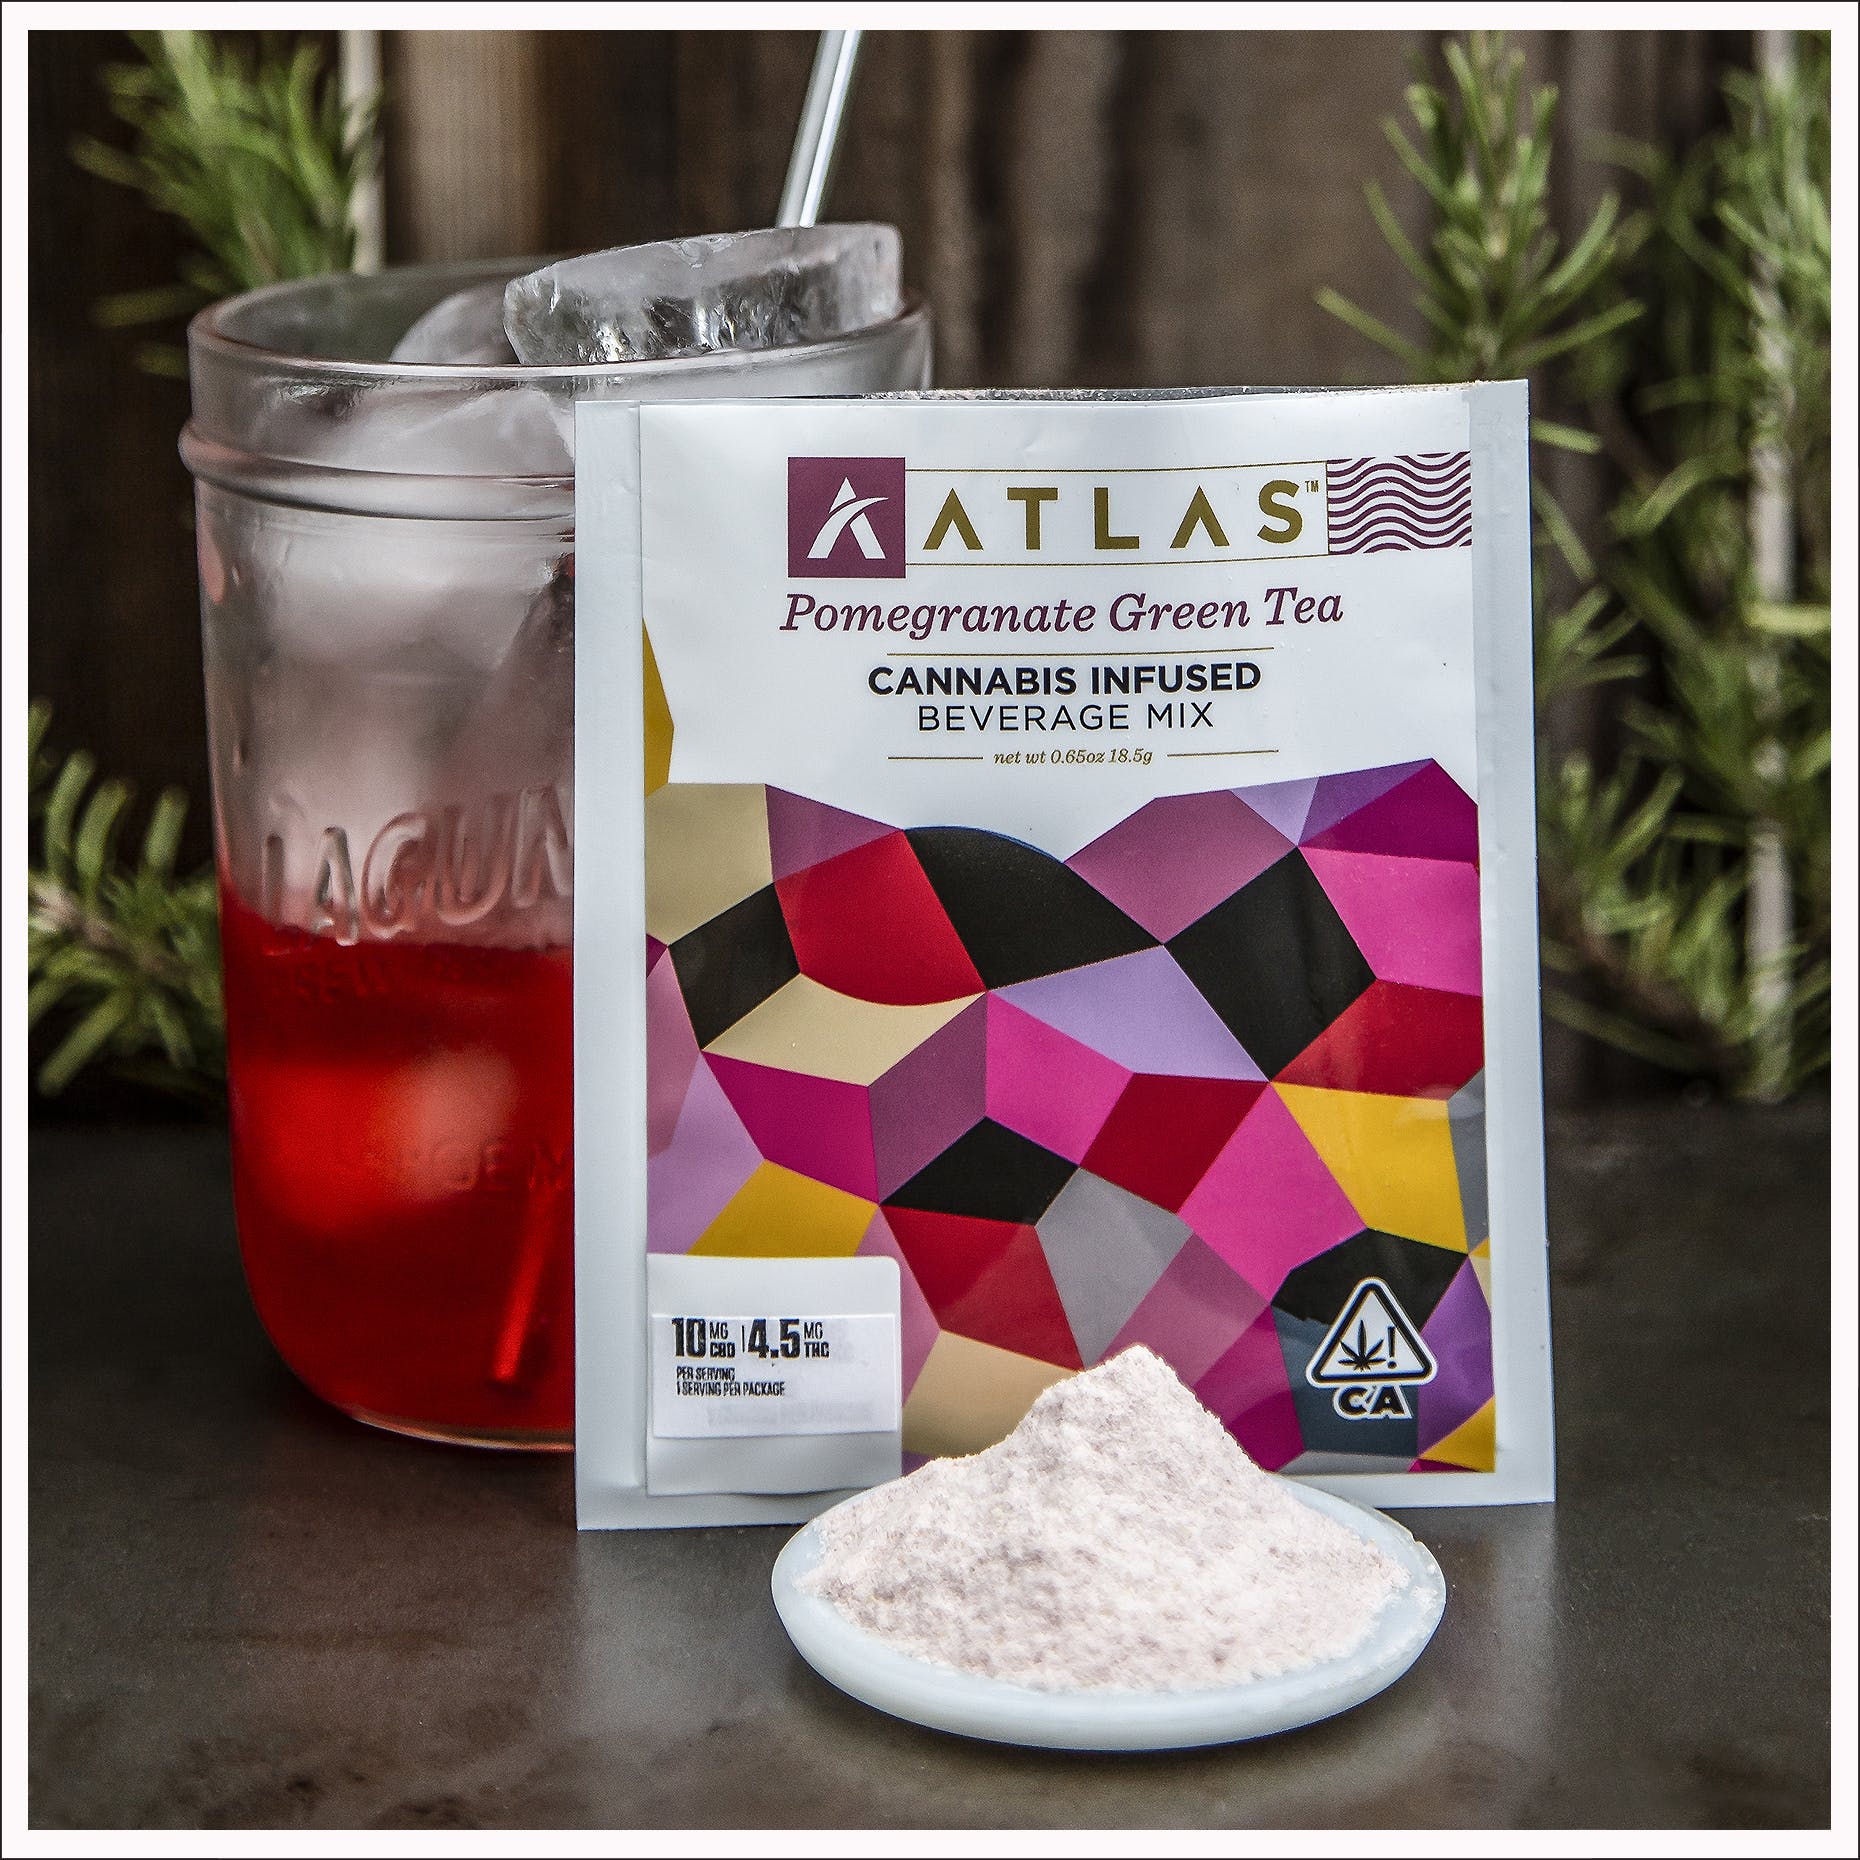 Pomegranate Green Tea Cannabis Infused Beverage Mix by Atlas